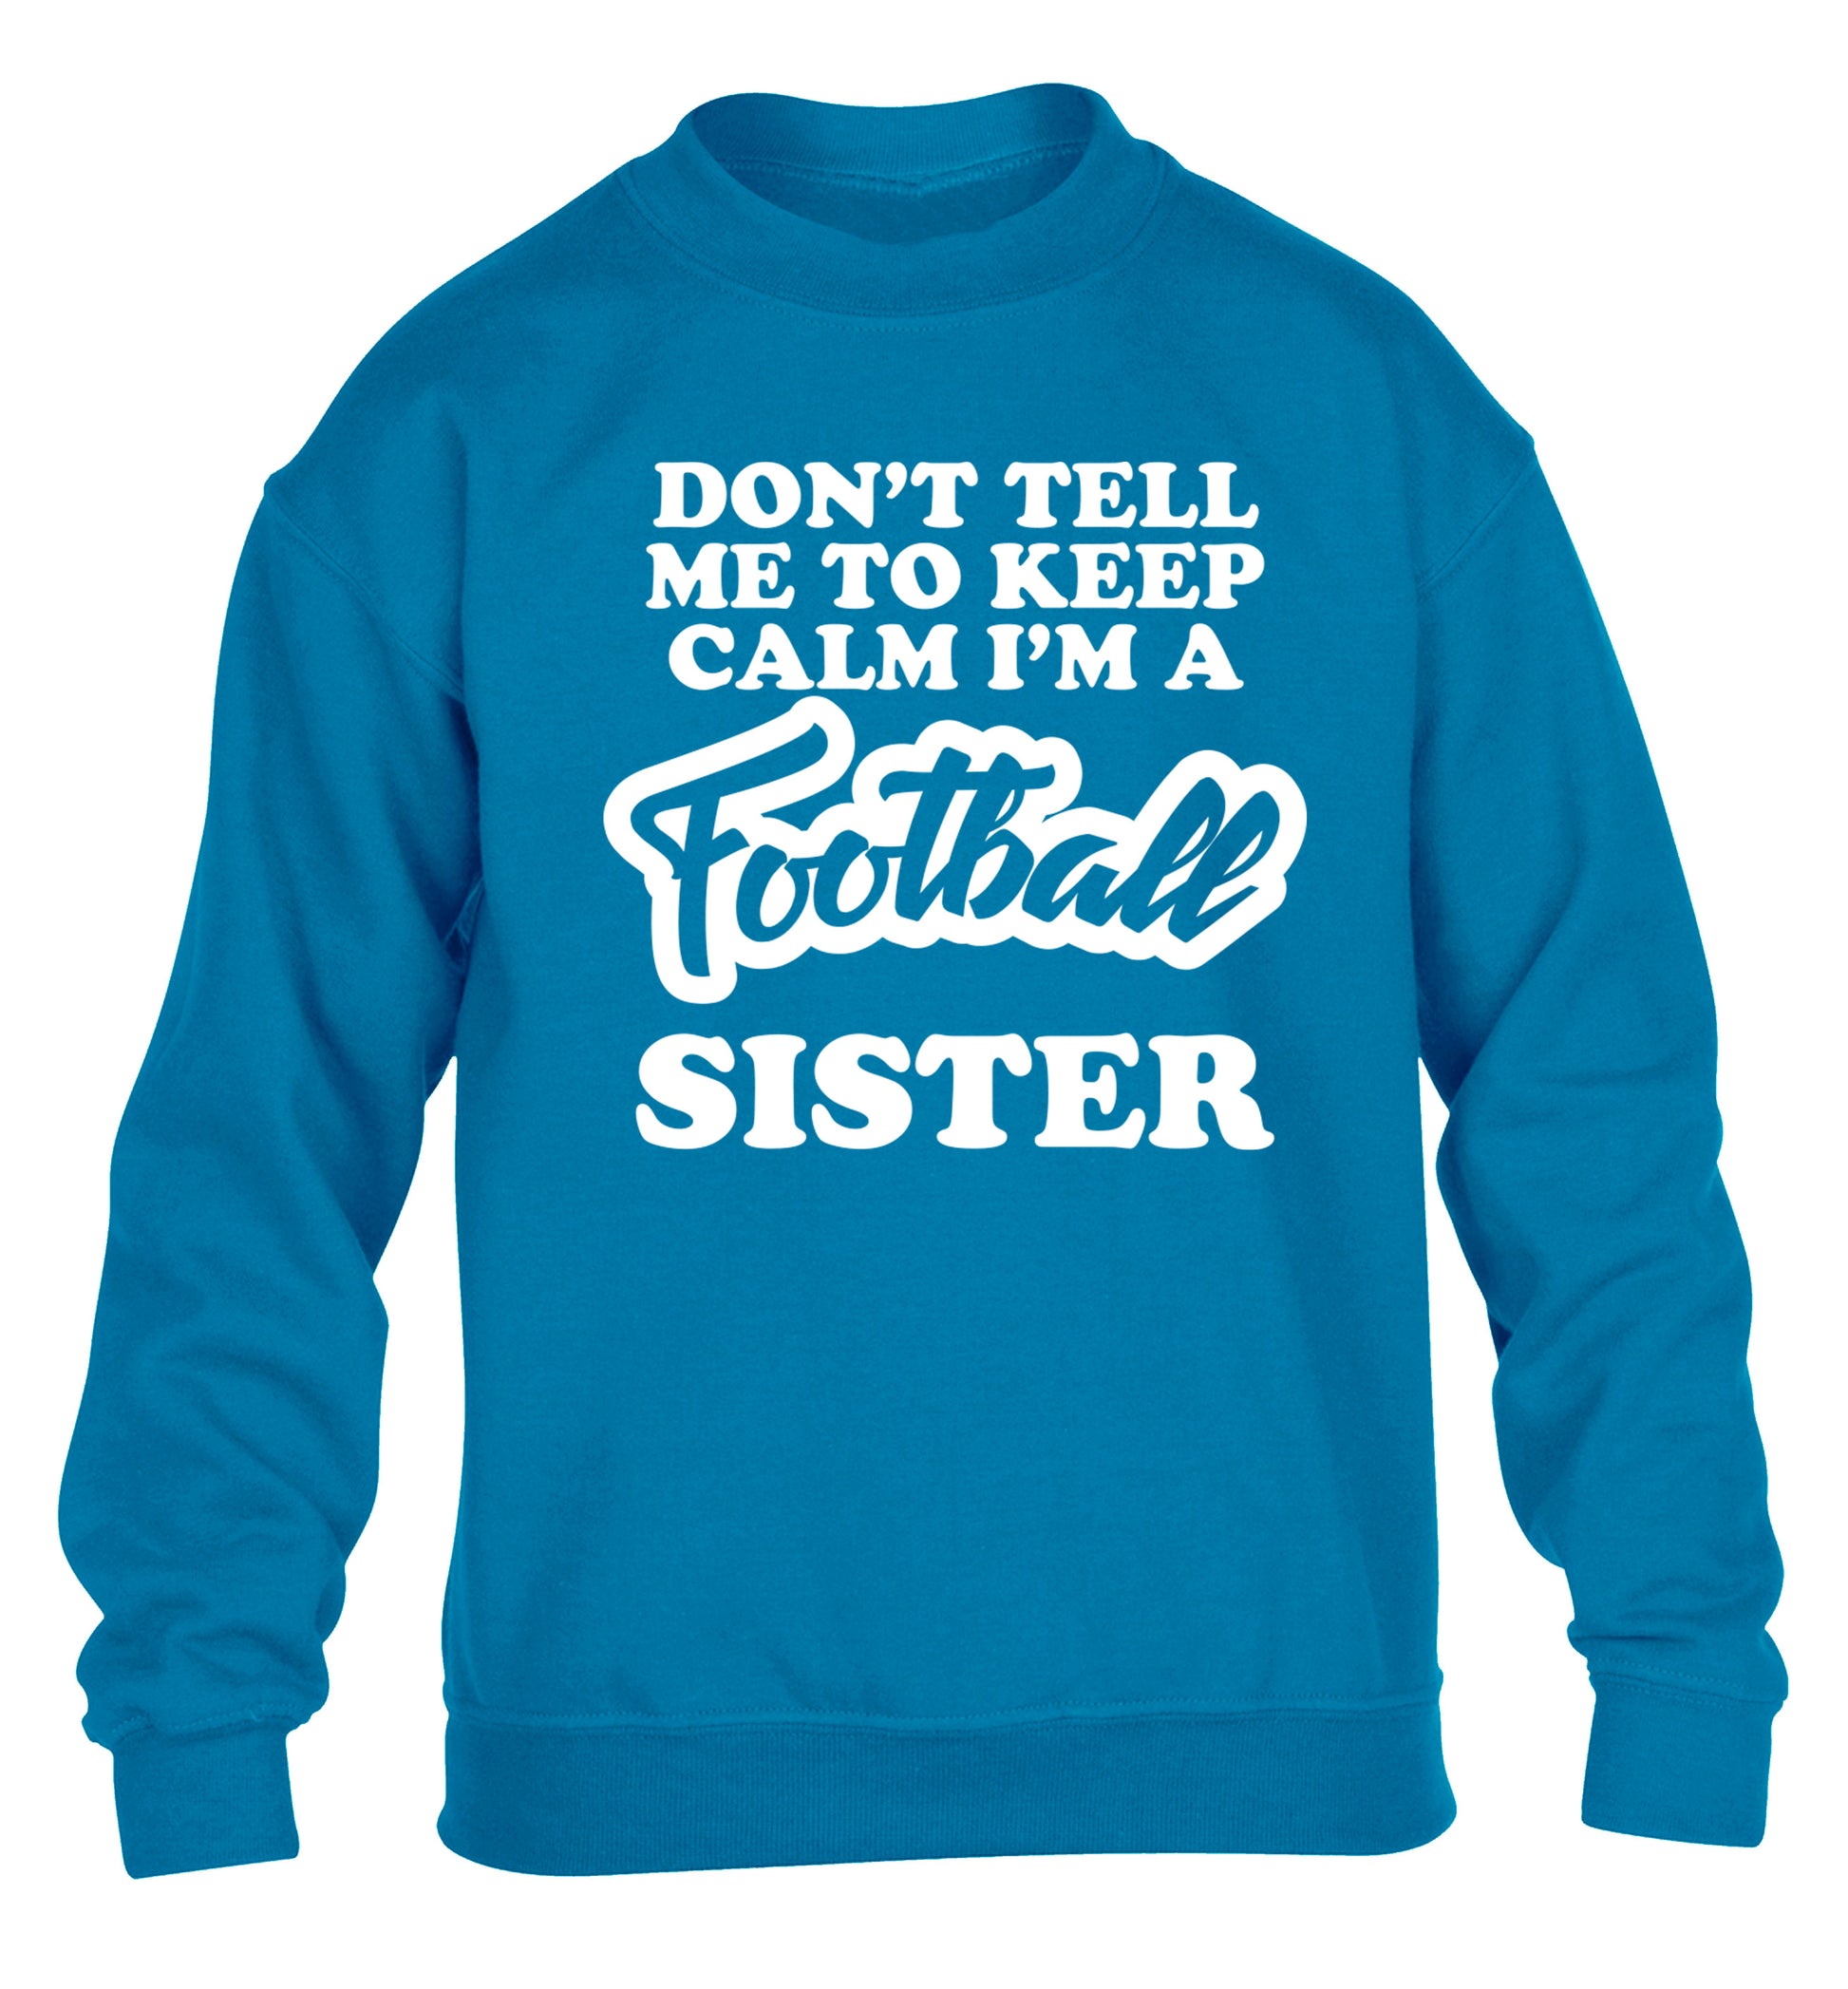 Don't tell me to keep calm I'm a football sister children's blue sweater 12-14 Years